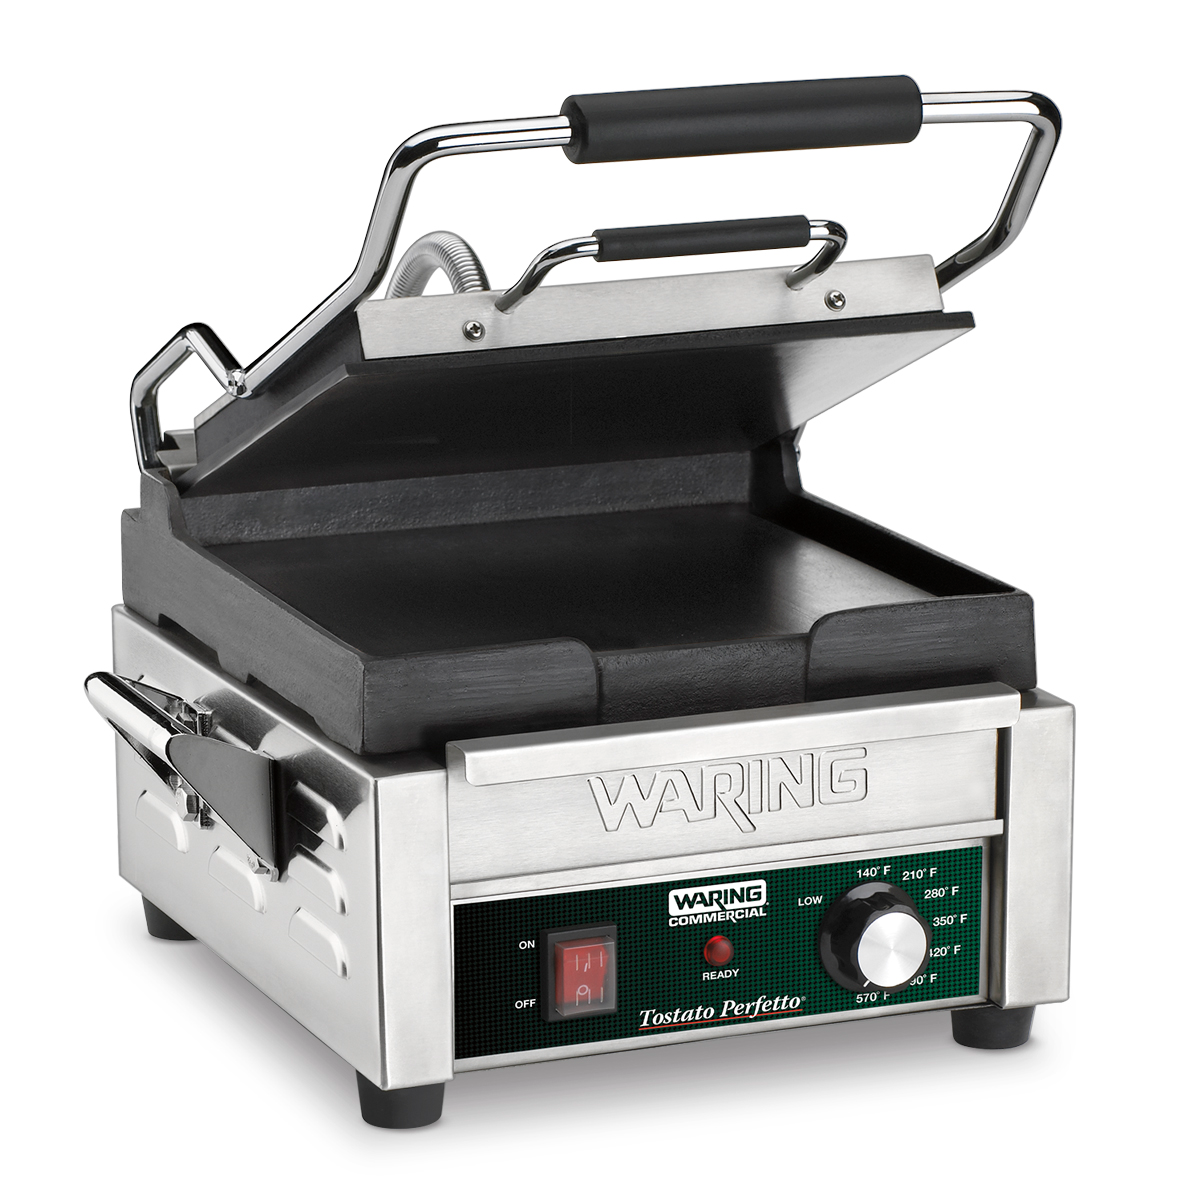 https://www.waringcommercialproducts.com/files/products/wfg150-waring-flat-grill-main.png